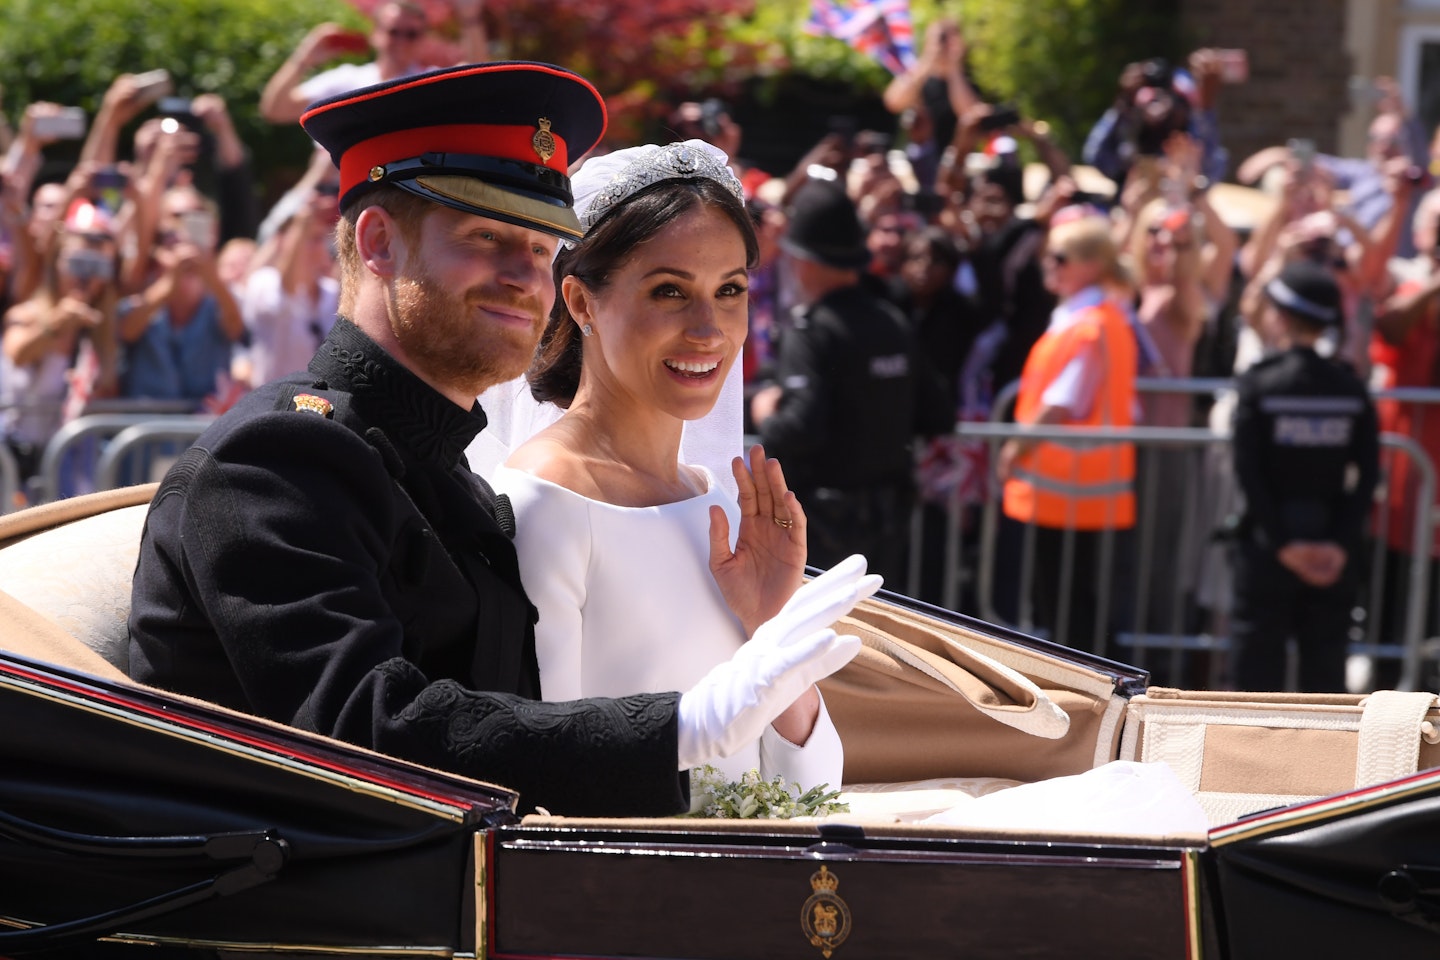 Prince Harry and Meghan Markle married in May 2018